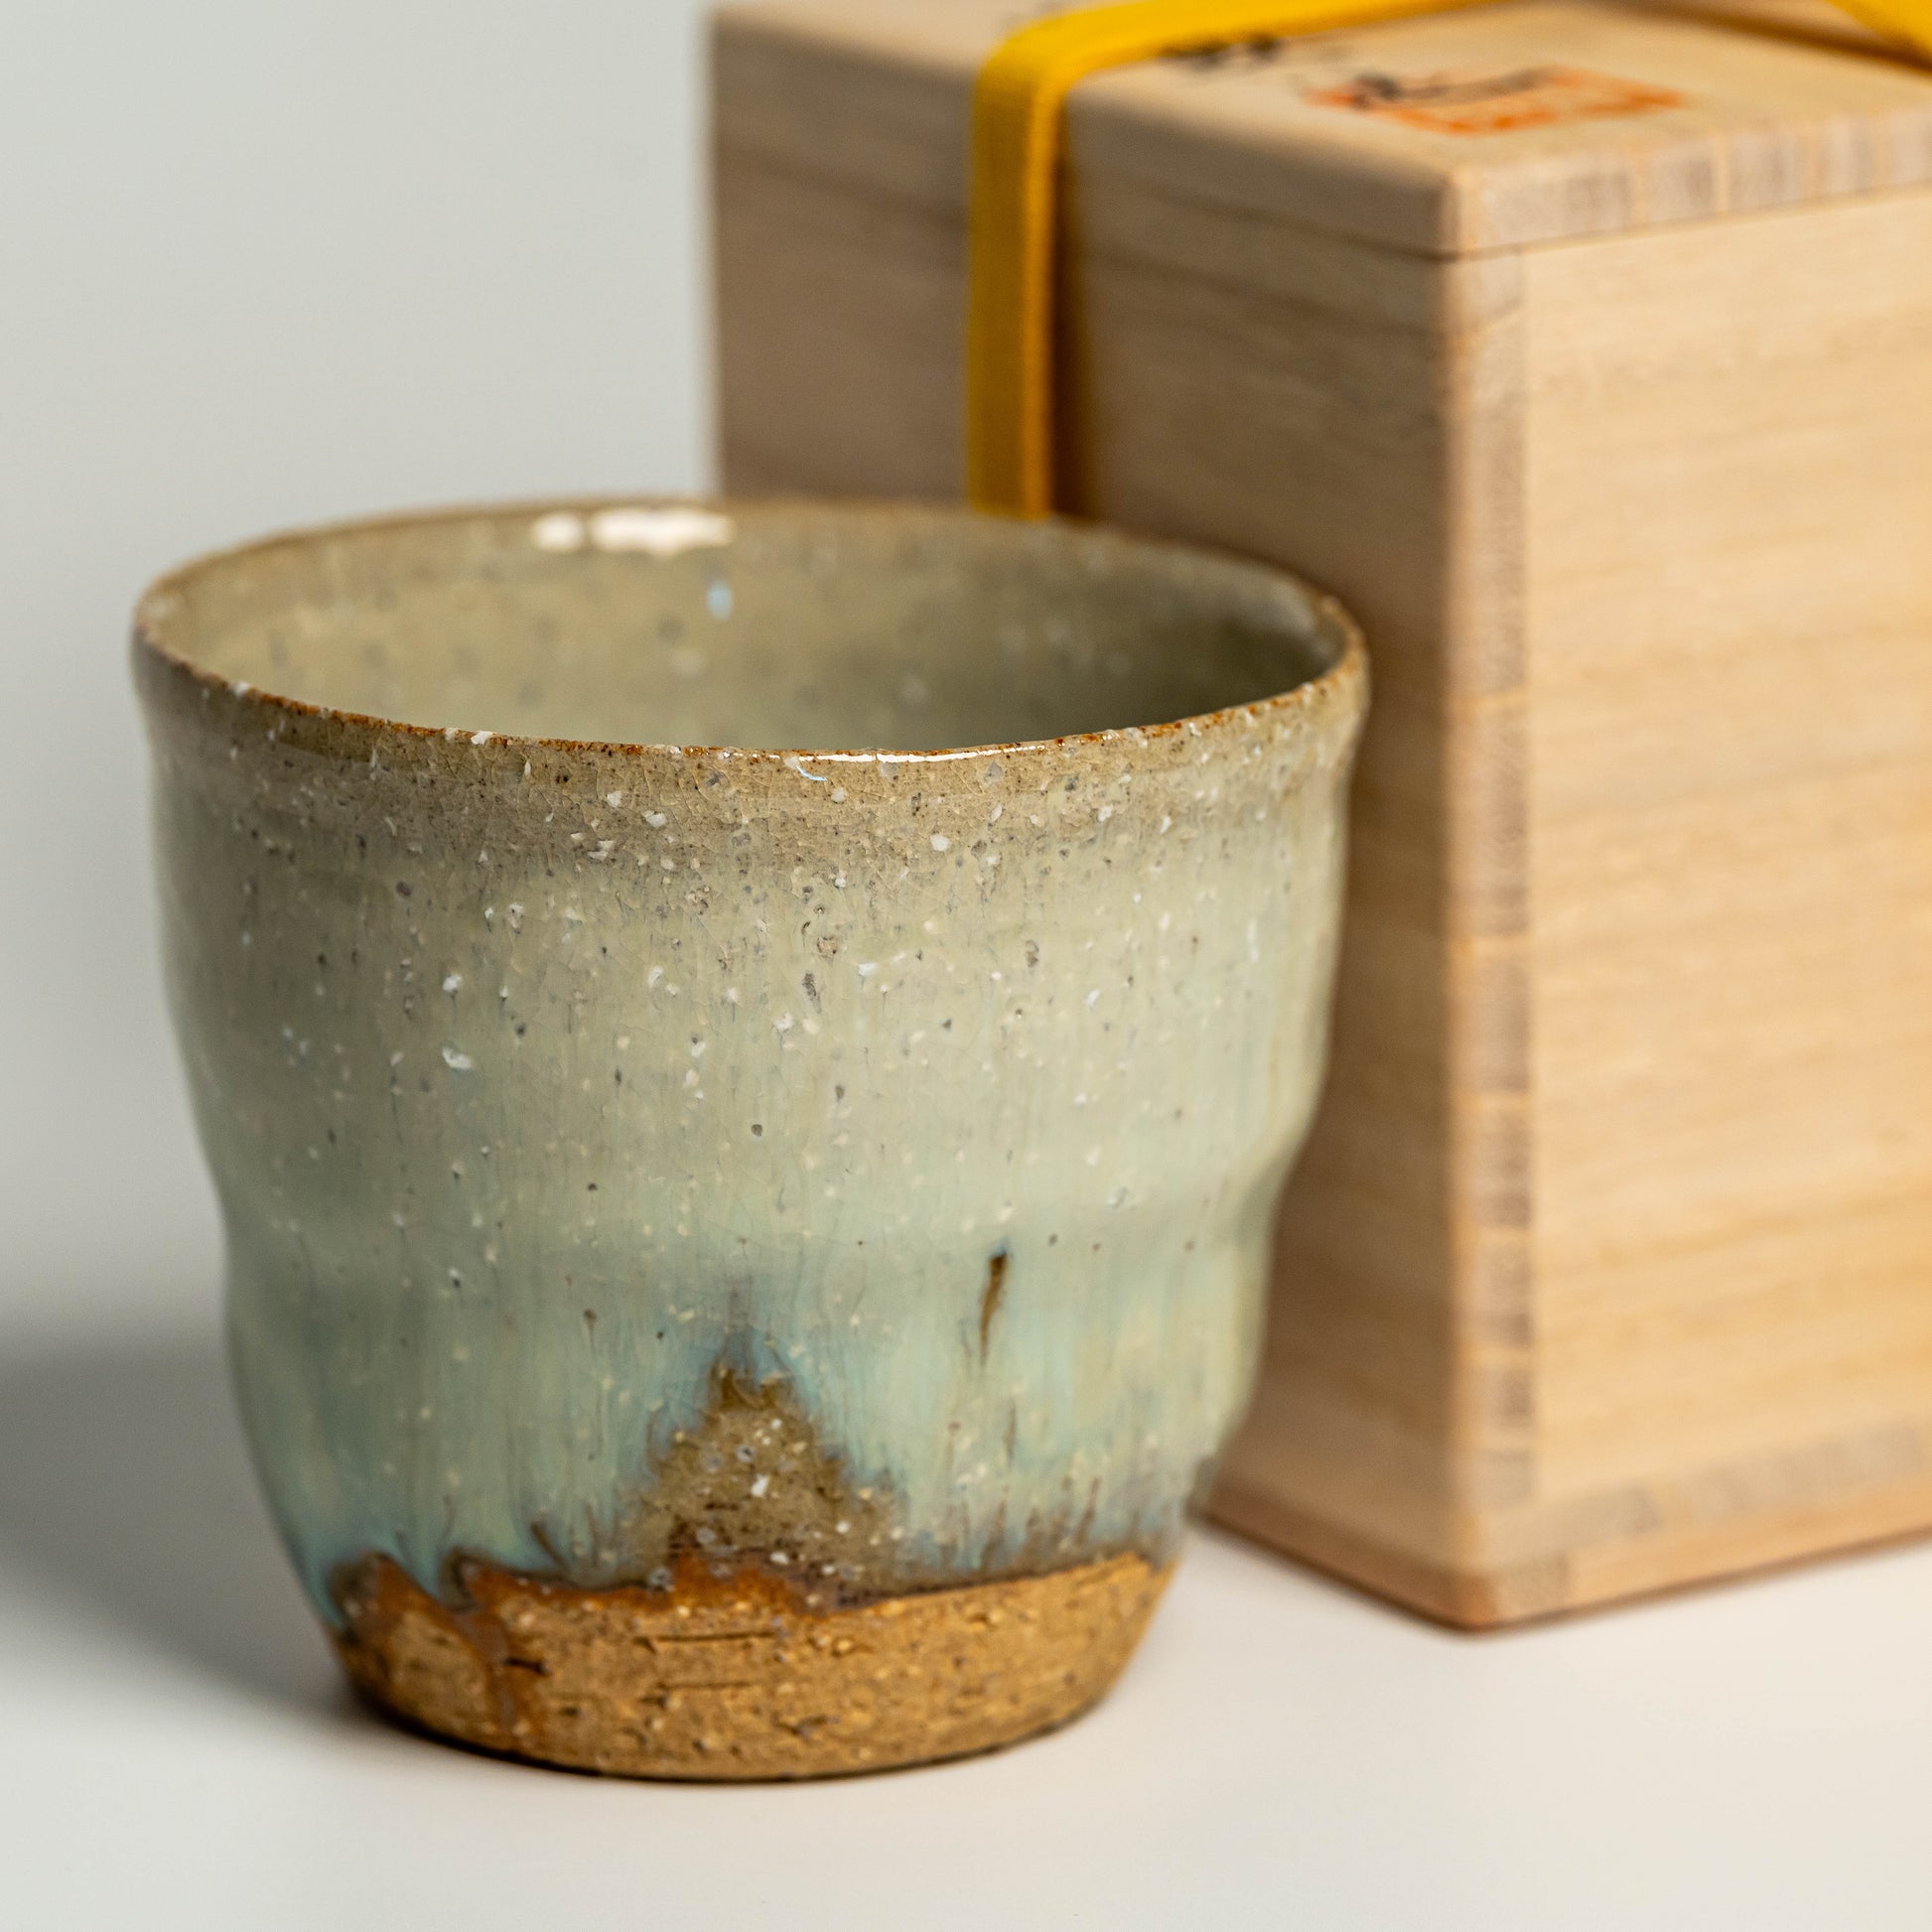 A close up of a green Hagi yaki shochu cup next to a wooden box